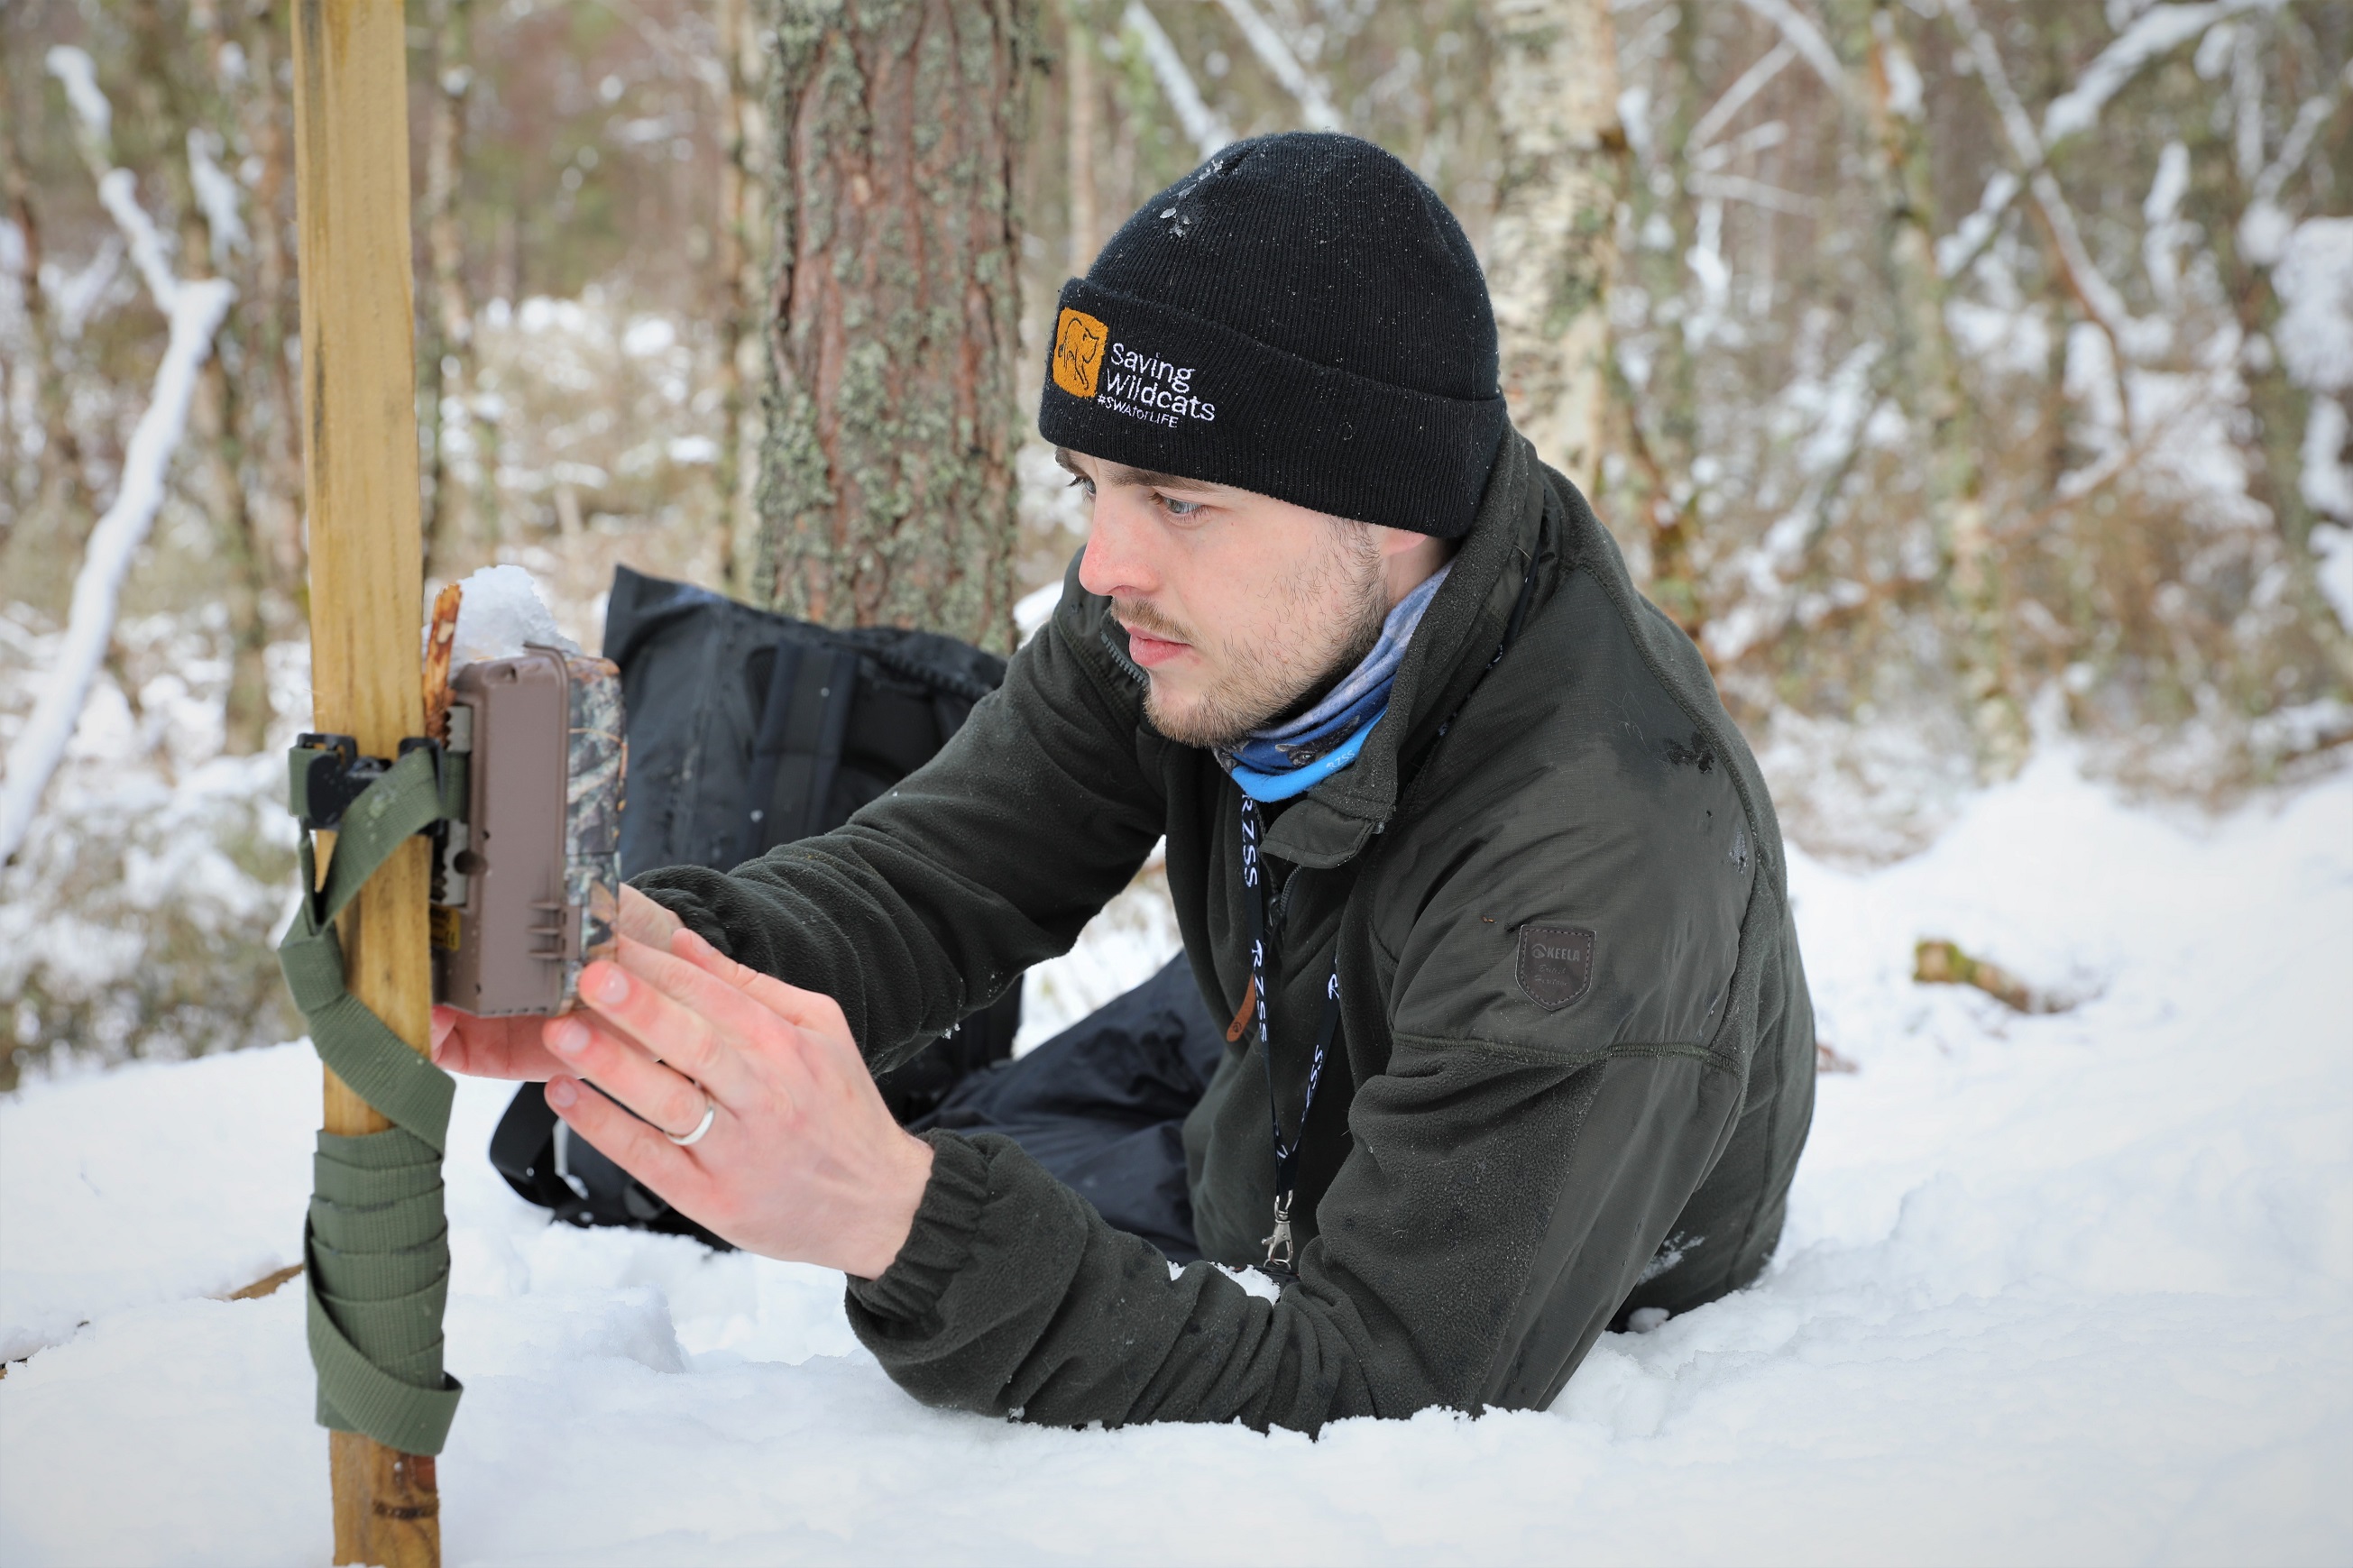 Saving Wildcats field worker Jamie Sneddon fitting a camera trap in the snow

March 2022 